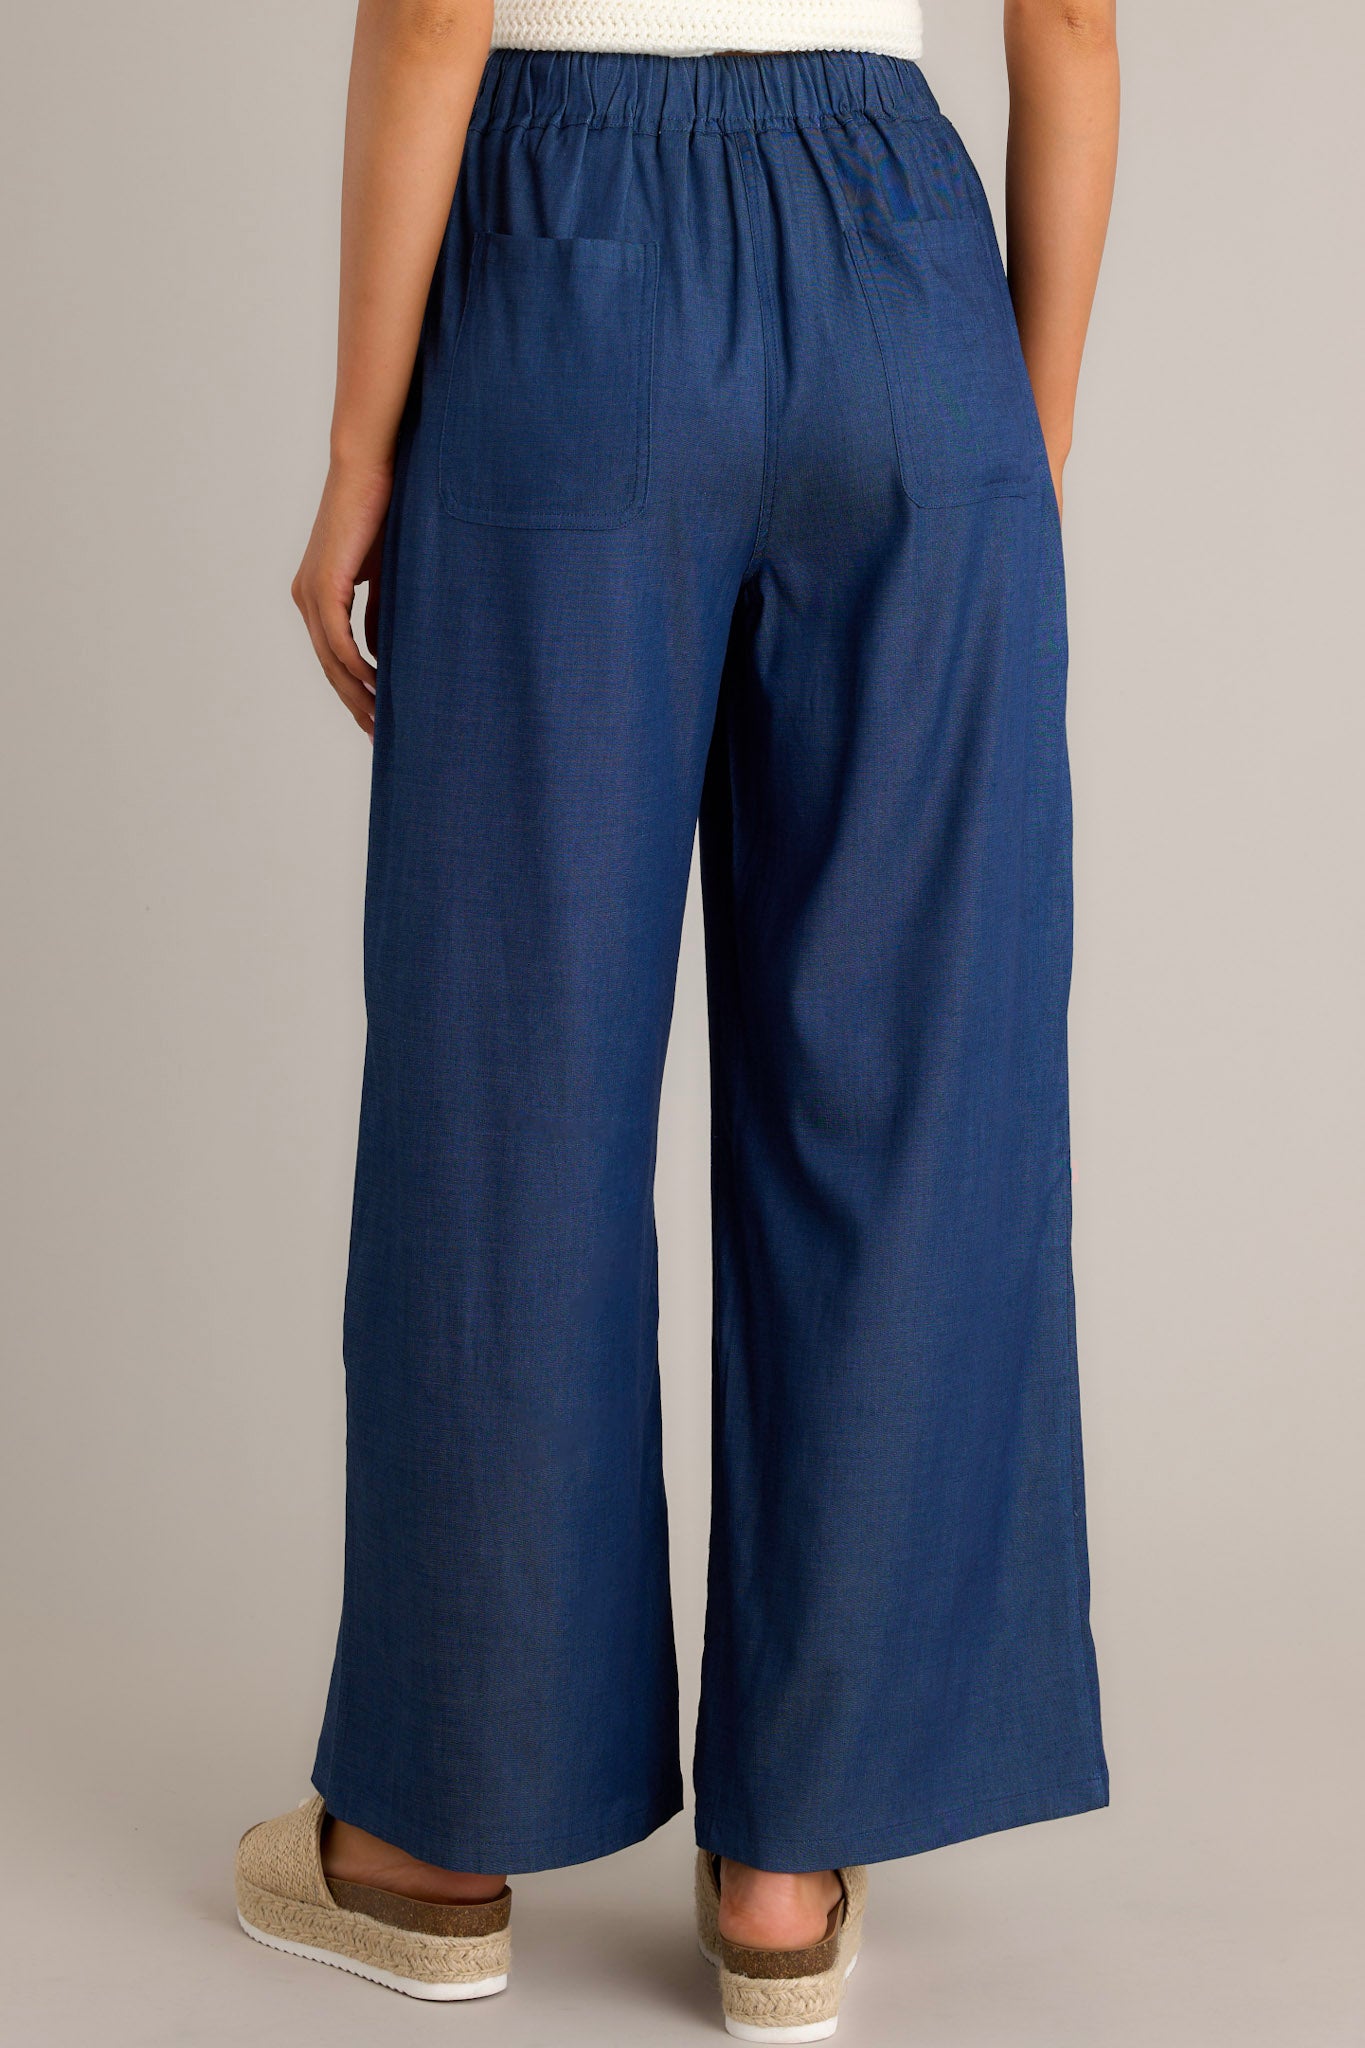 Back view of dark chambray pants highlighting the high waisted design, elastic waistband, and wide leg.